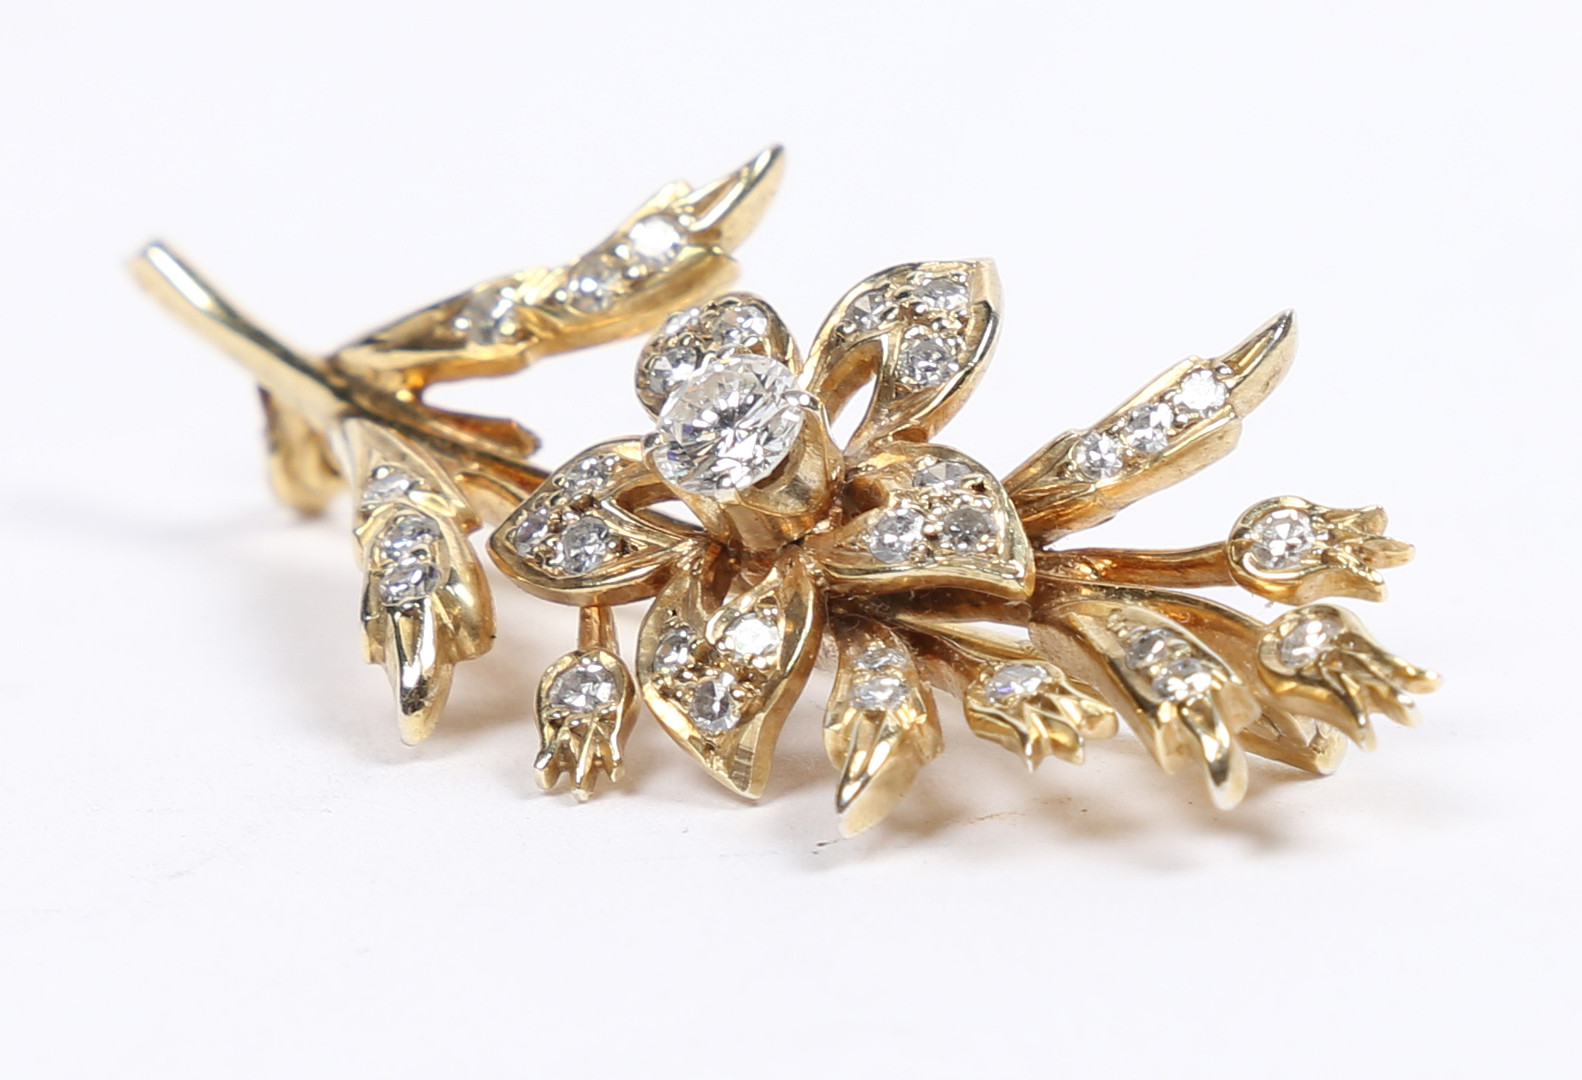 AN 18 CARAT GOLD AND DIAMOND BROOCH. - Image 4 of 5